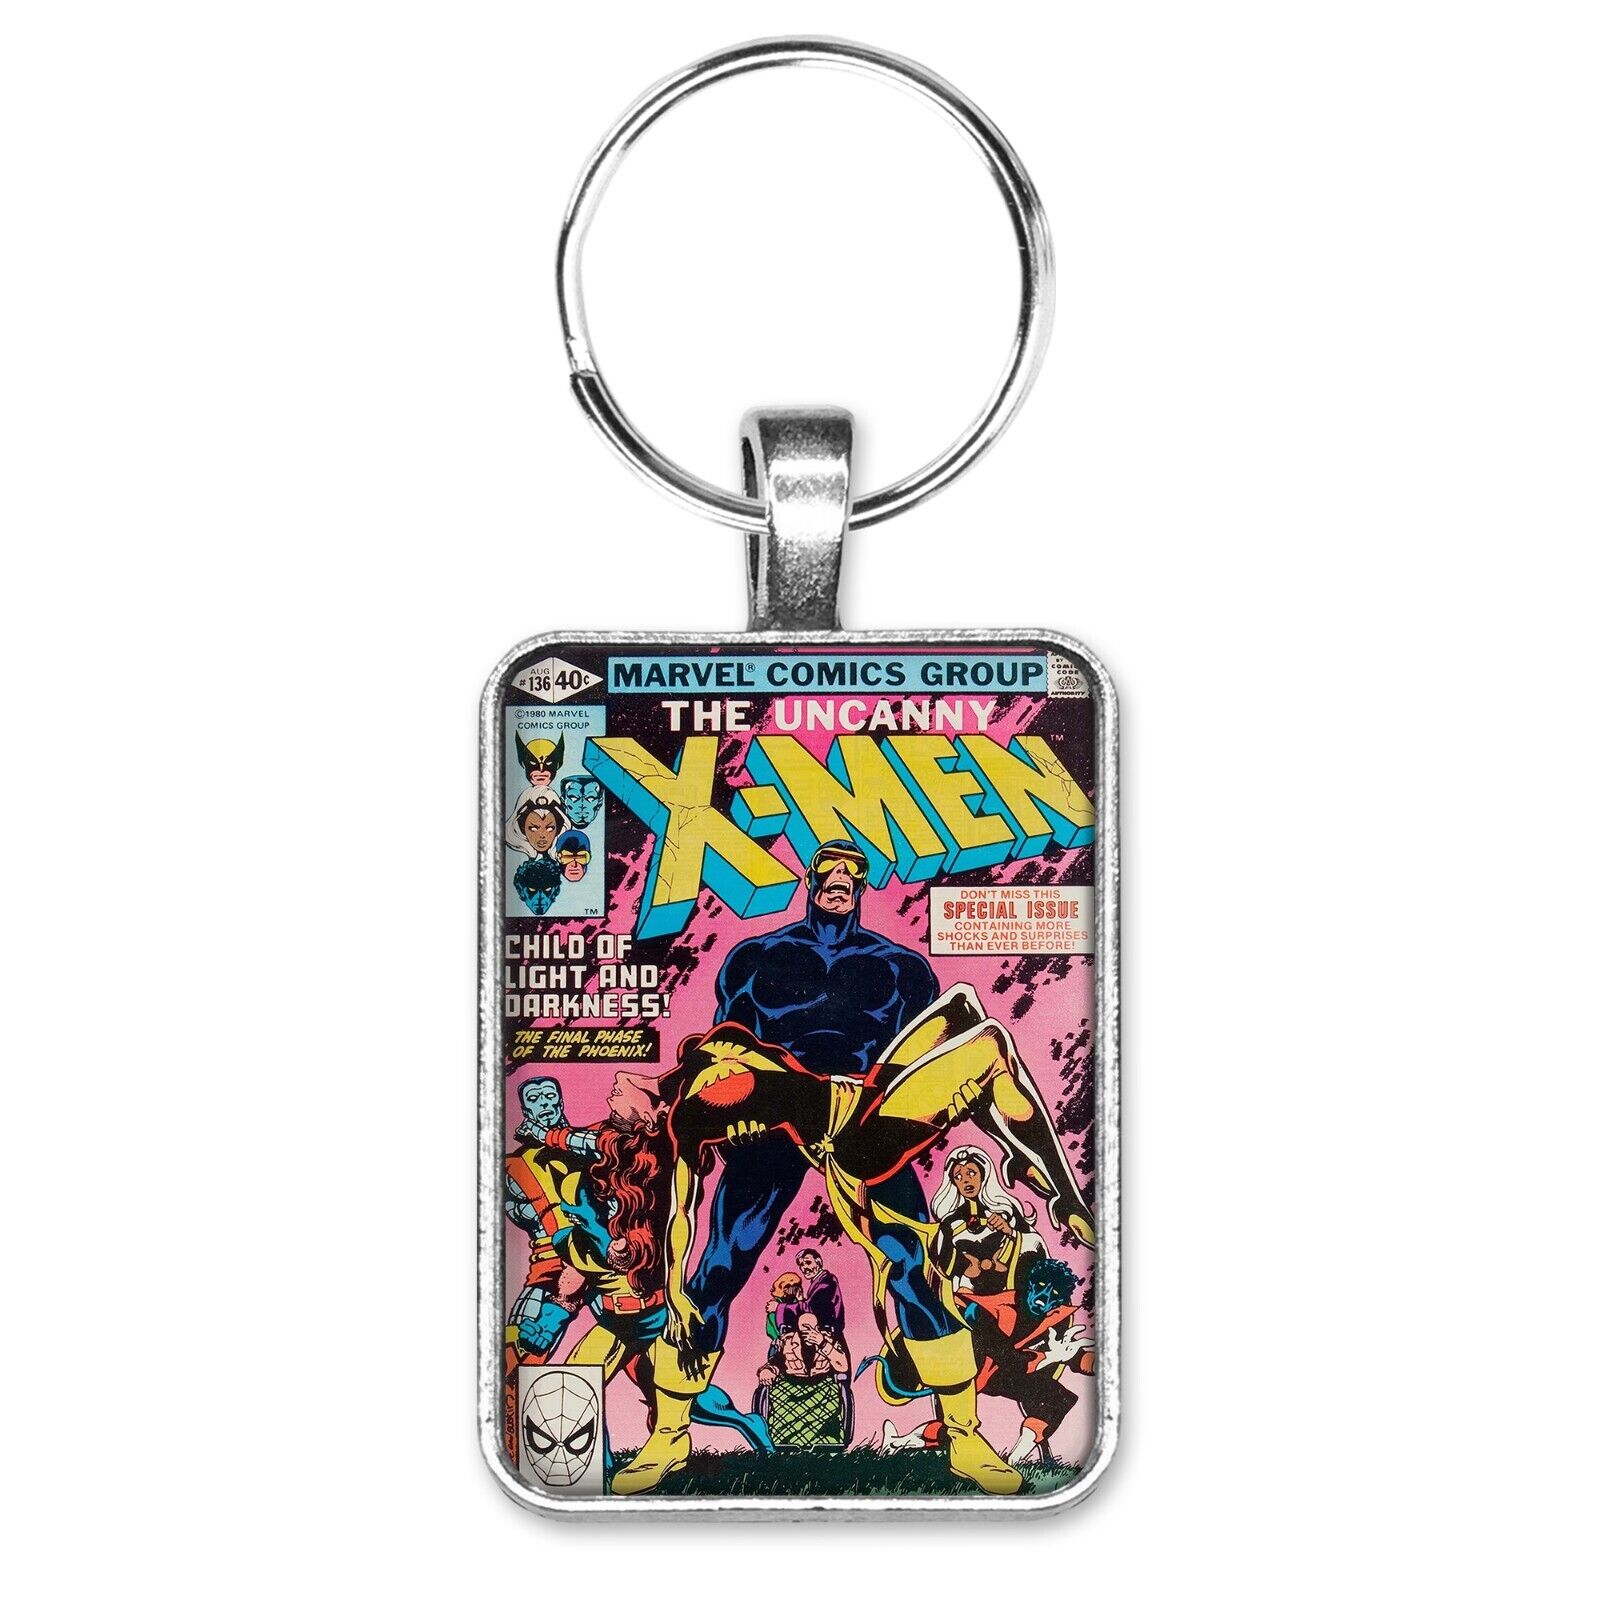 X-Men #136 Cover Key Ring or Necklace Classic Phoenix Cyclops Marvel Comic Book